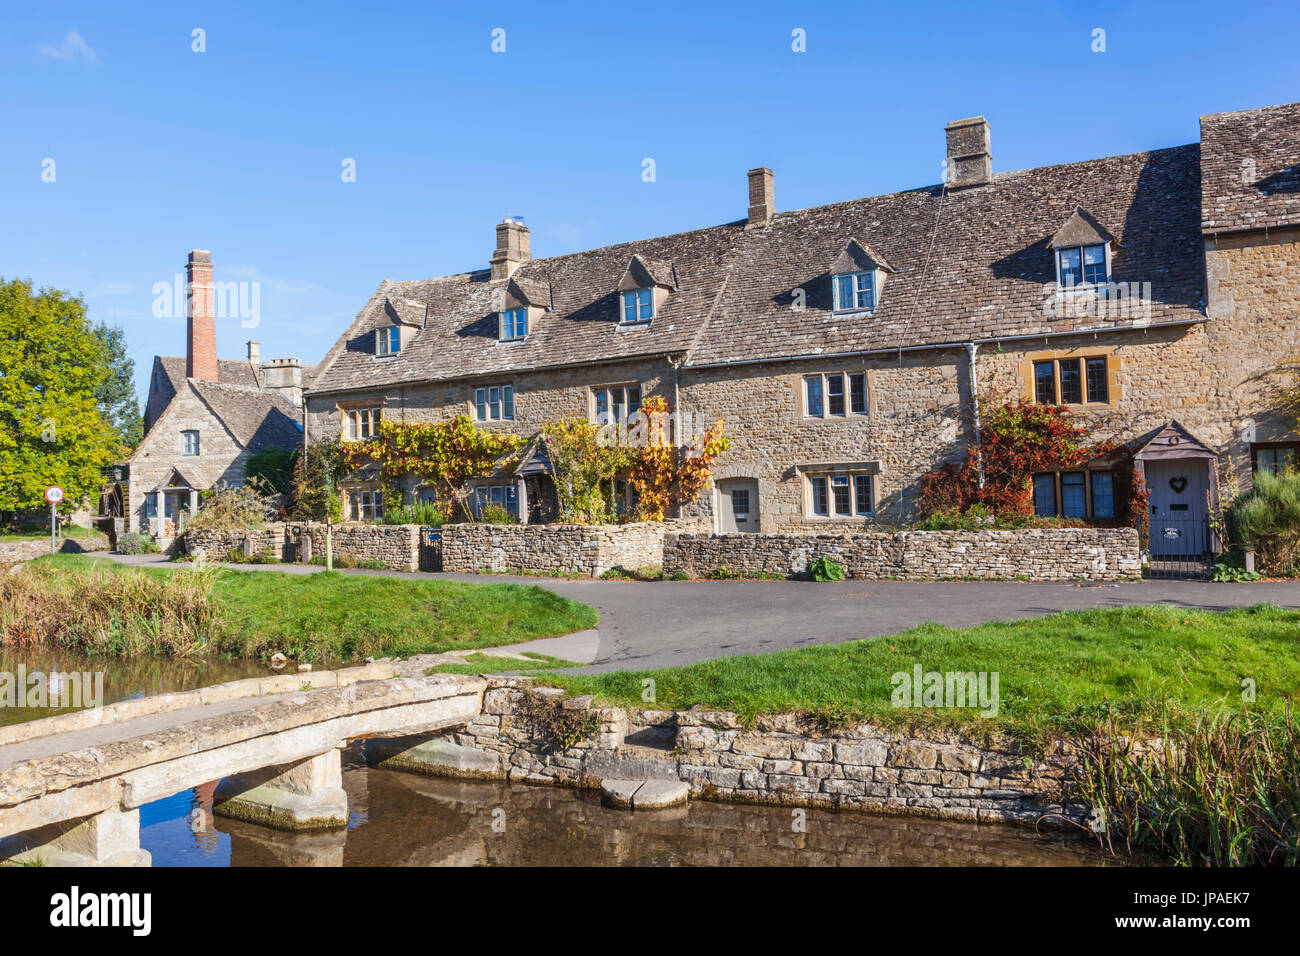 England, Gloucestershire, Cotswolds, obere Schlachtung Stockfoto